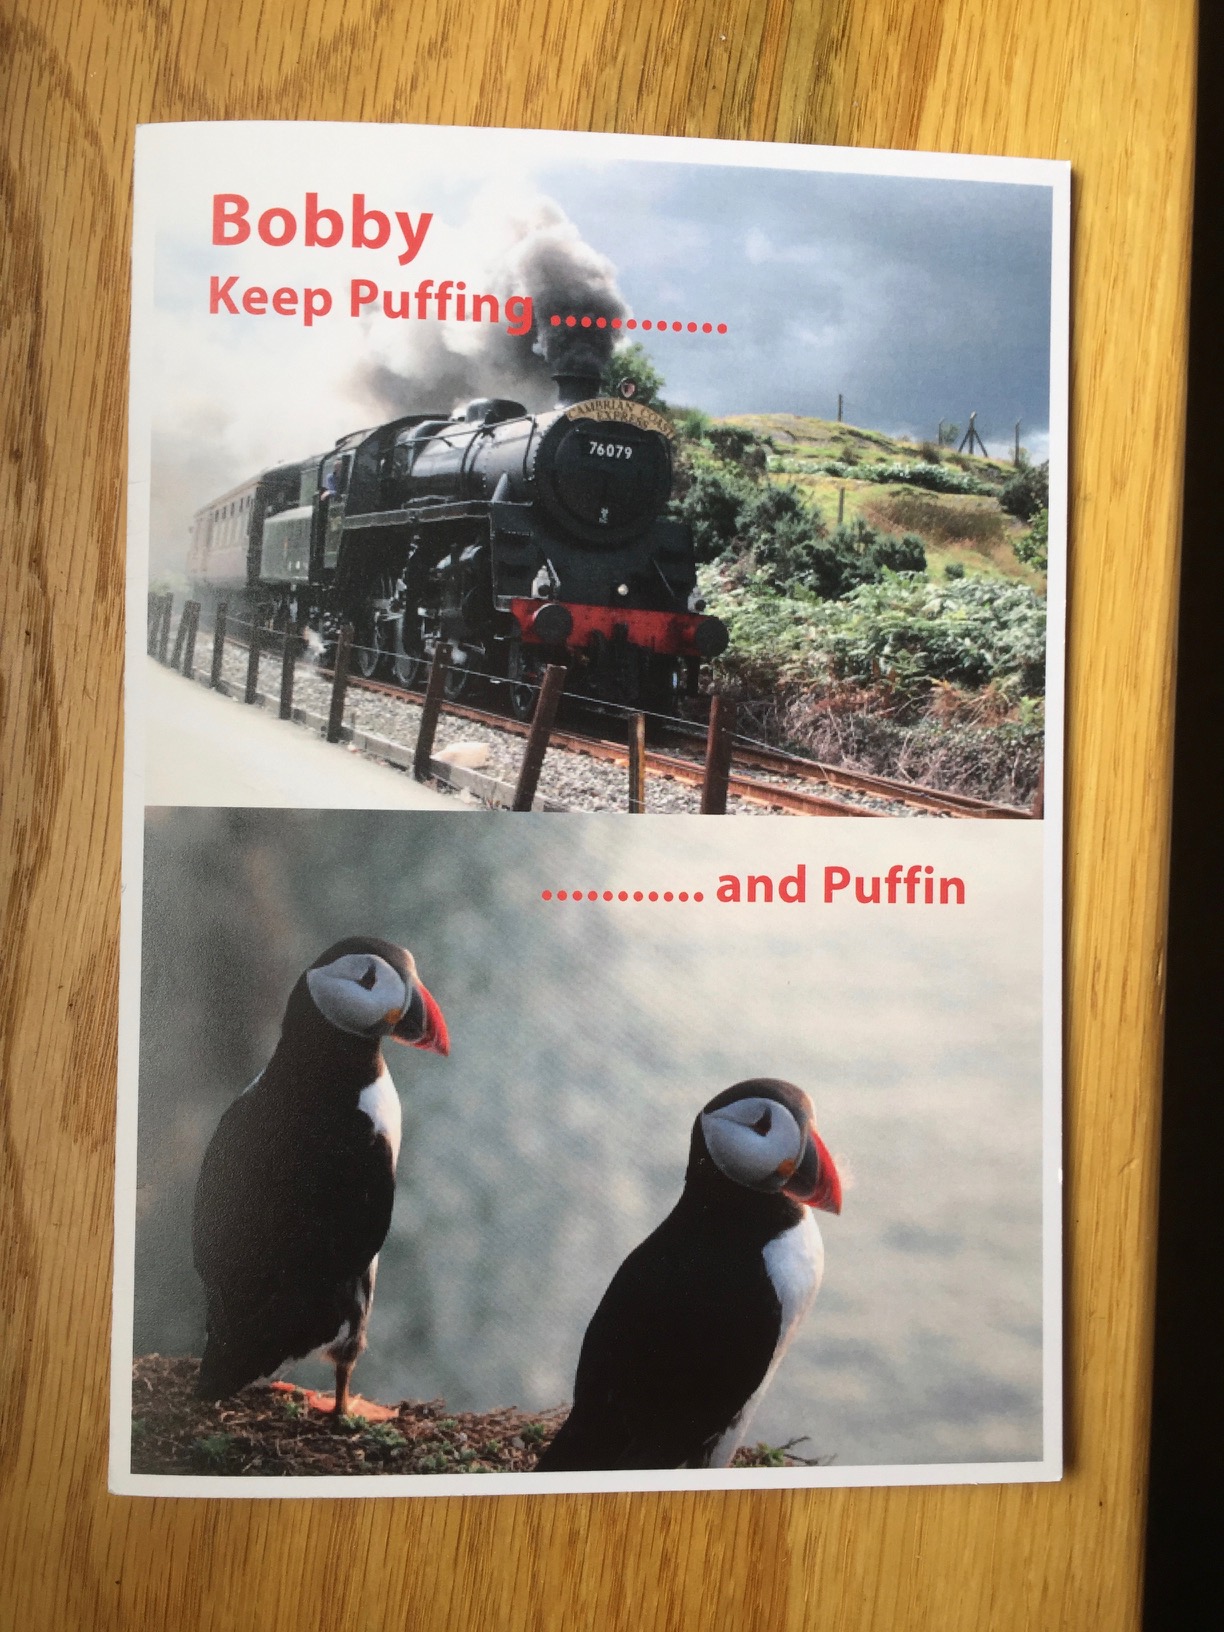 Lighting a Candle for Diddley: Picture of a steam train and a pair of Puffins. Captioned: "Bobby Keep Puffing.... and Puffin".